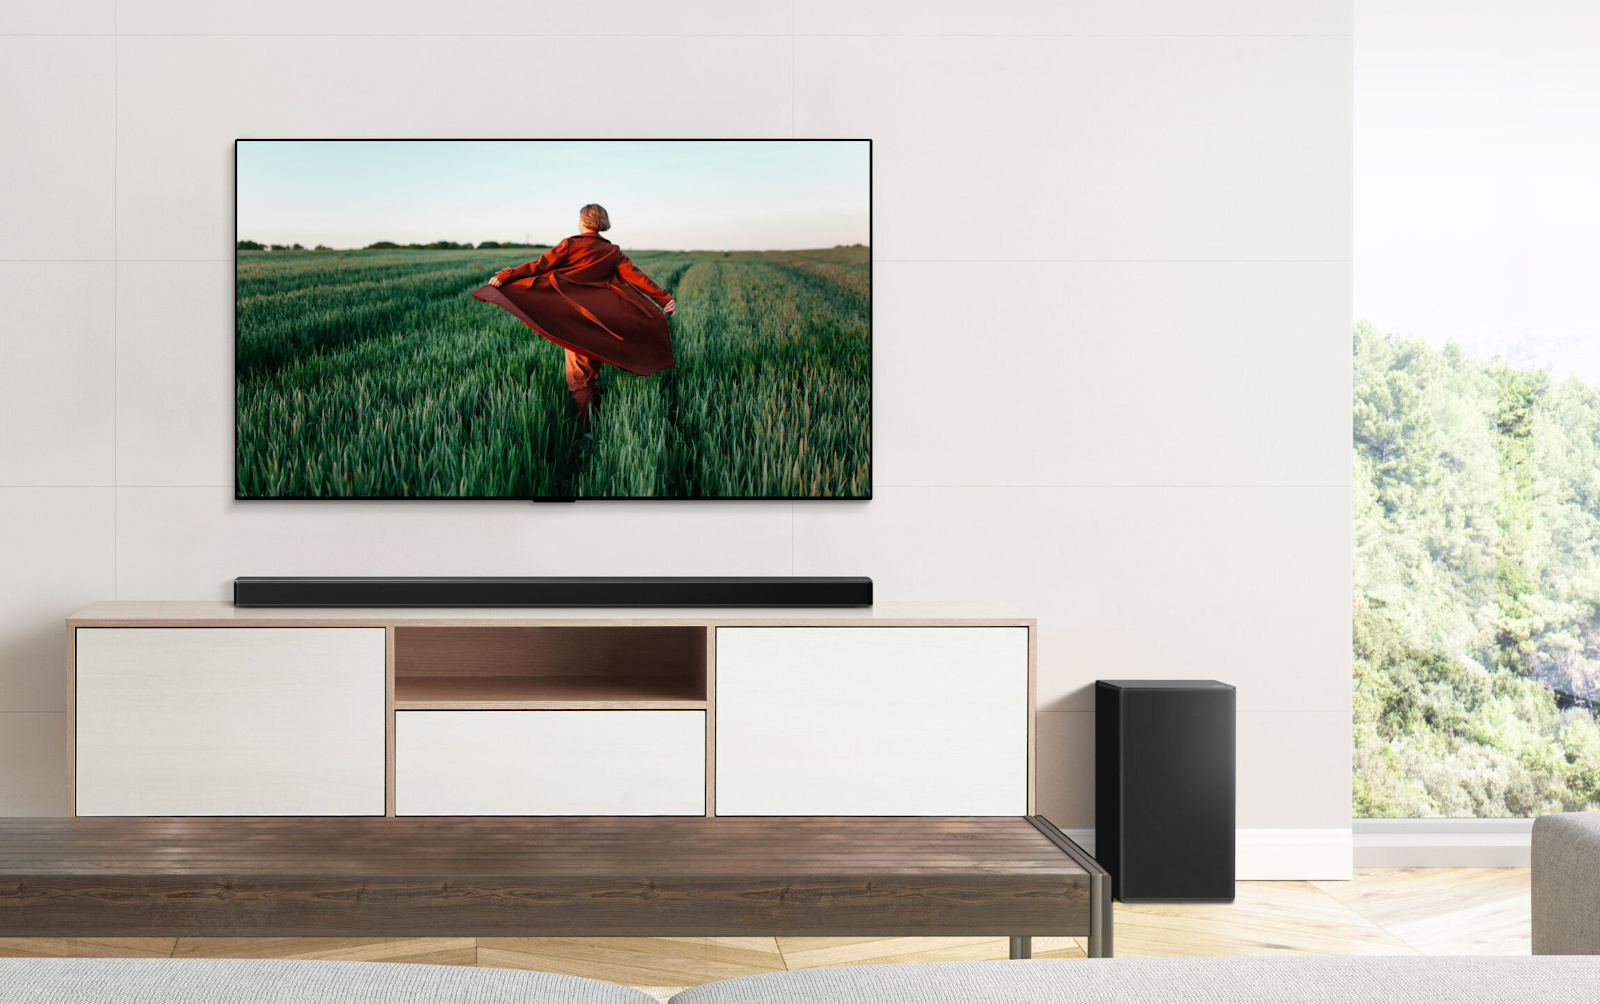 LG’s 2021 soundbars come in within the US starting up at $179